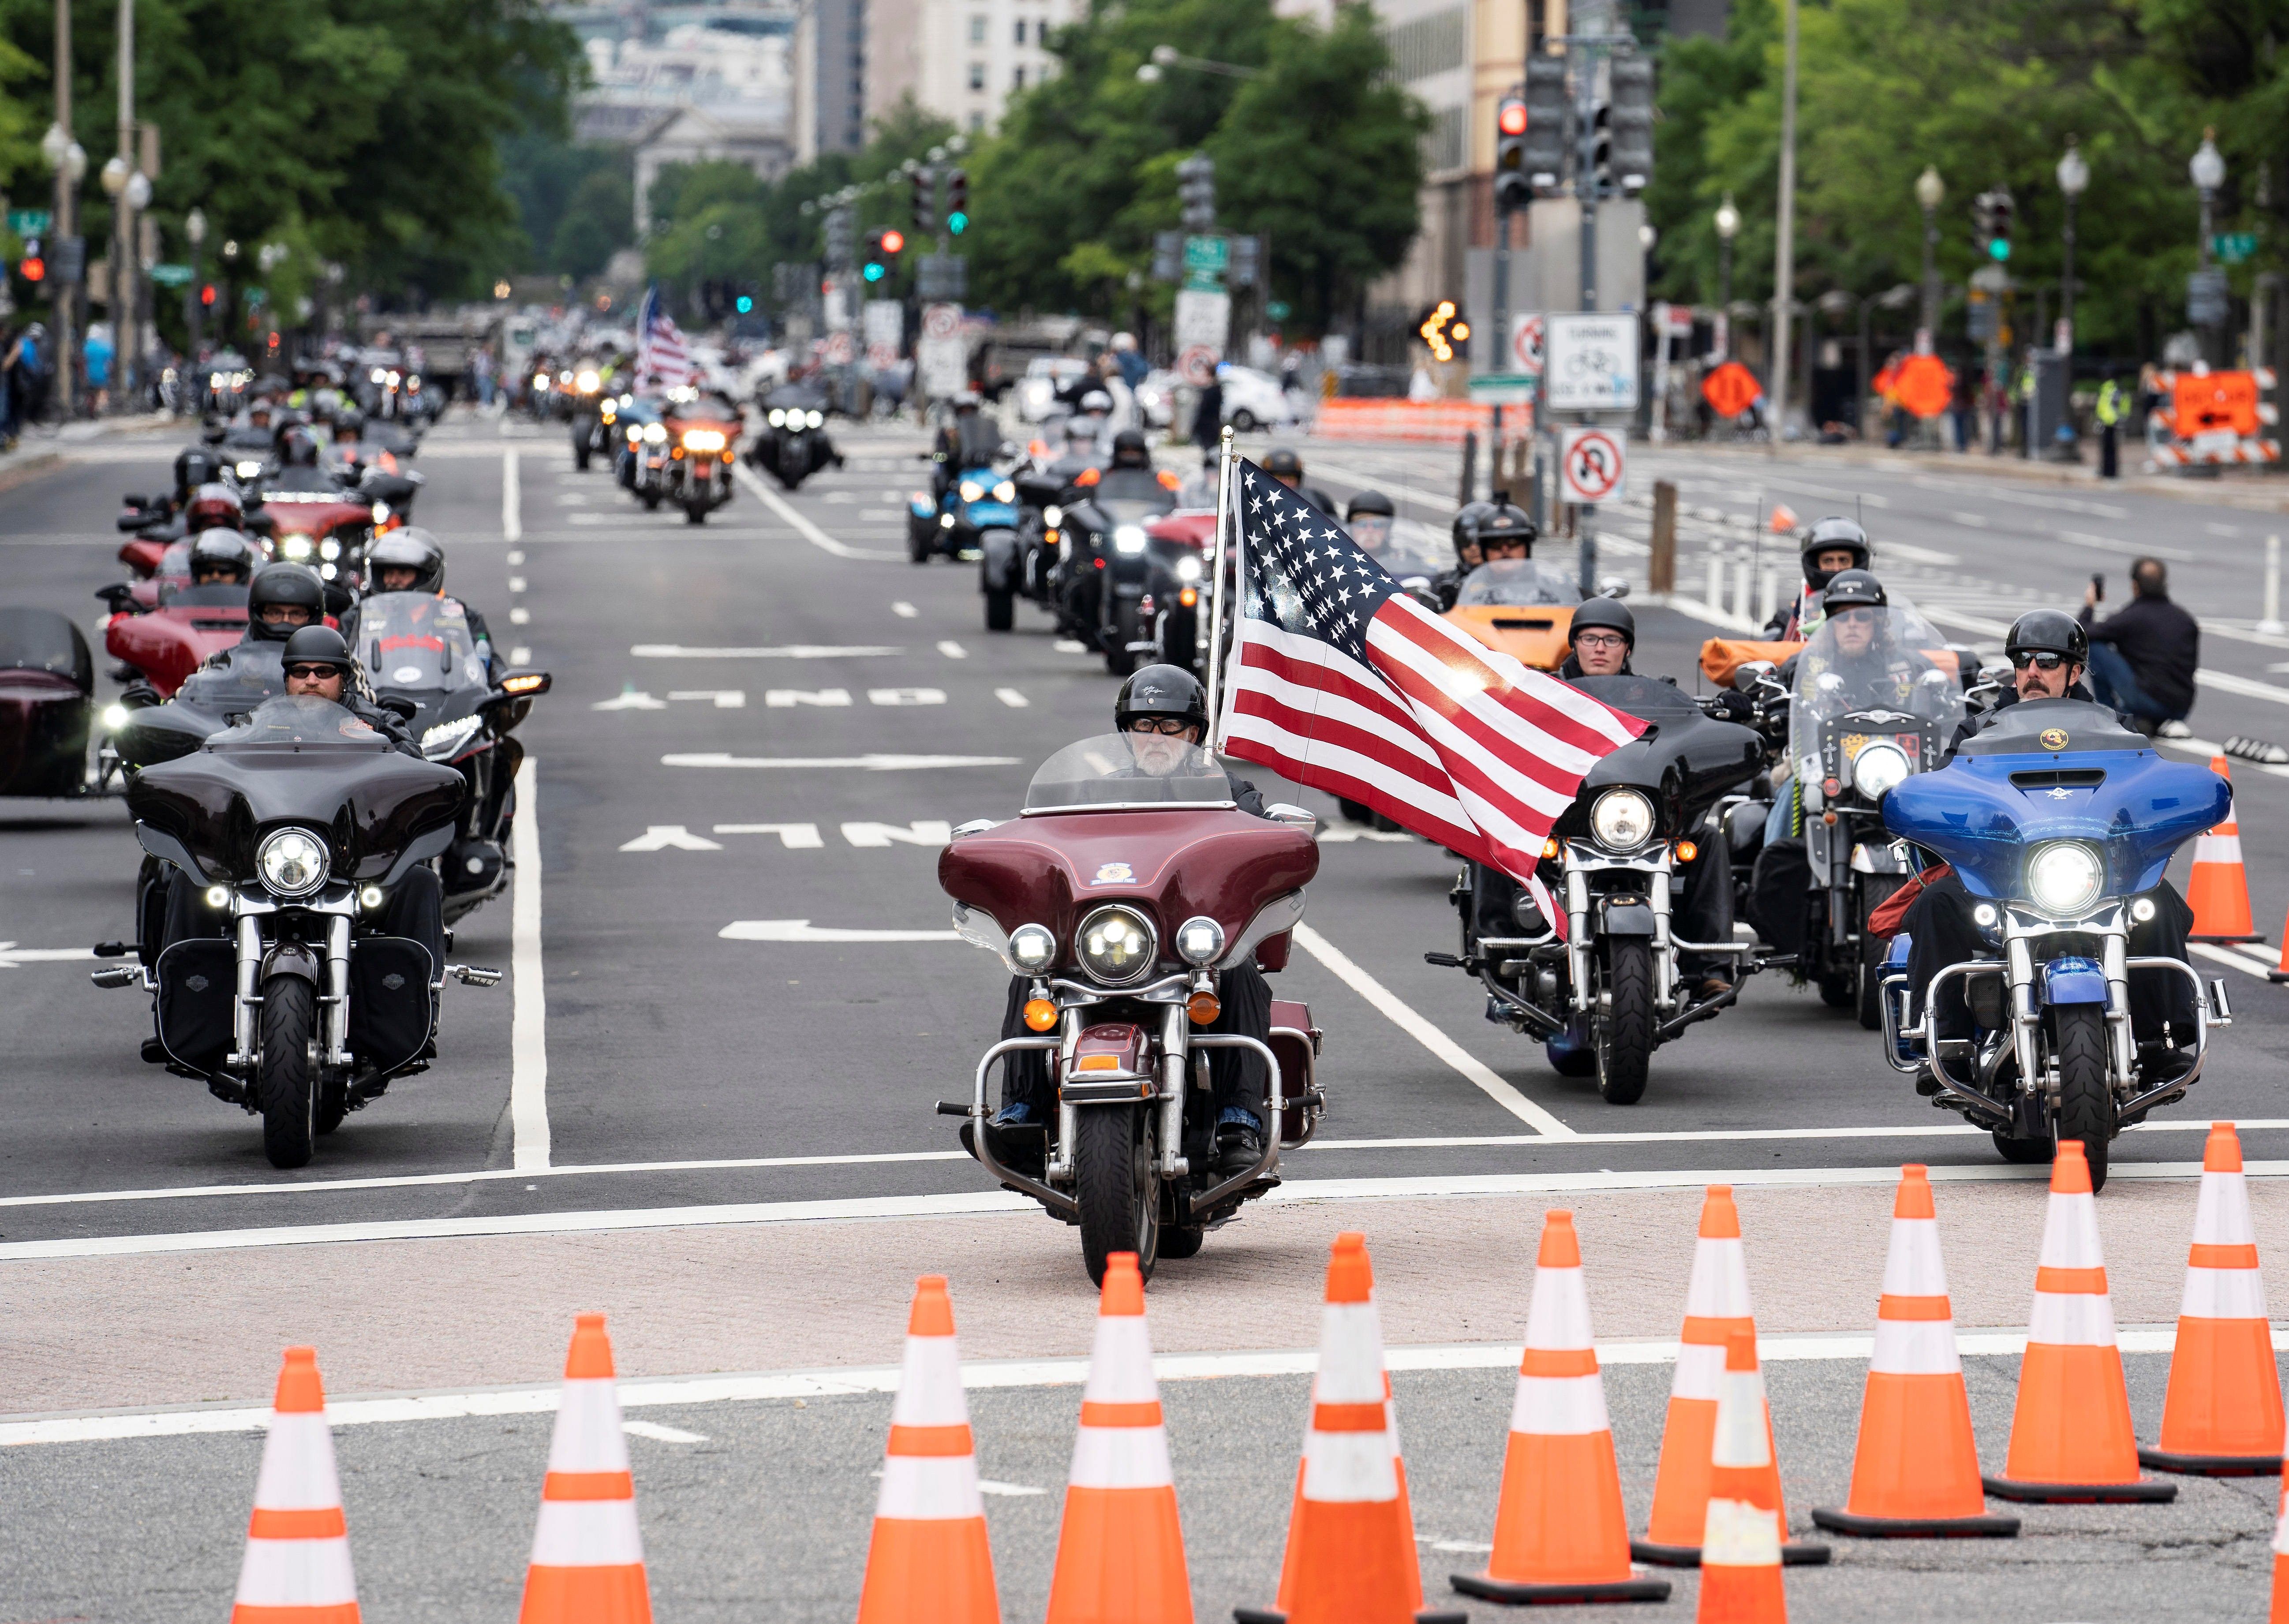 A motorcycle carrying an American flag drives towards orange cones